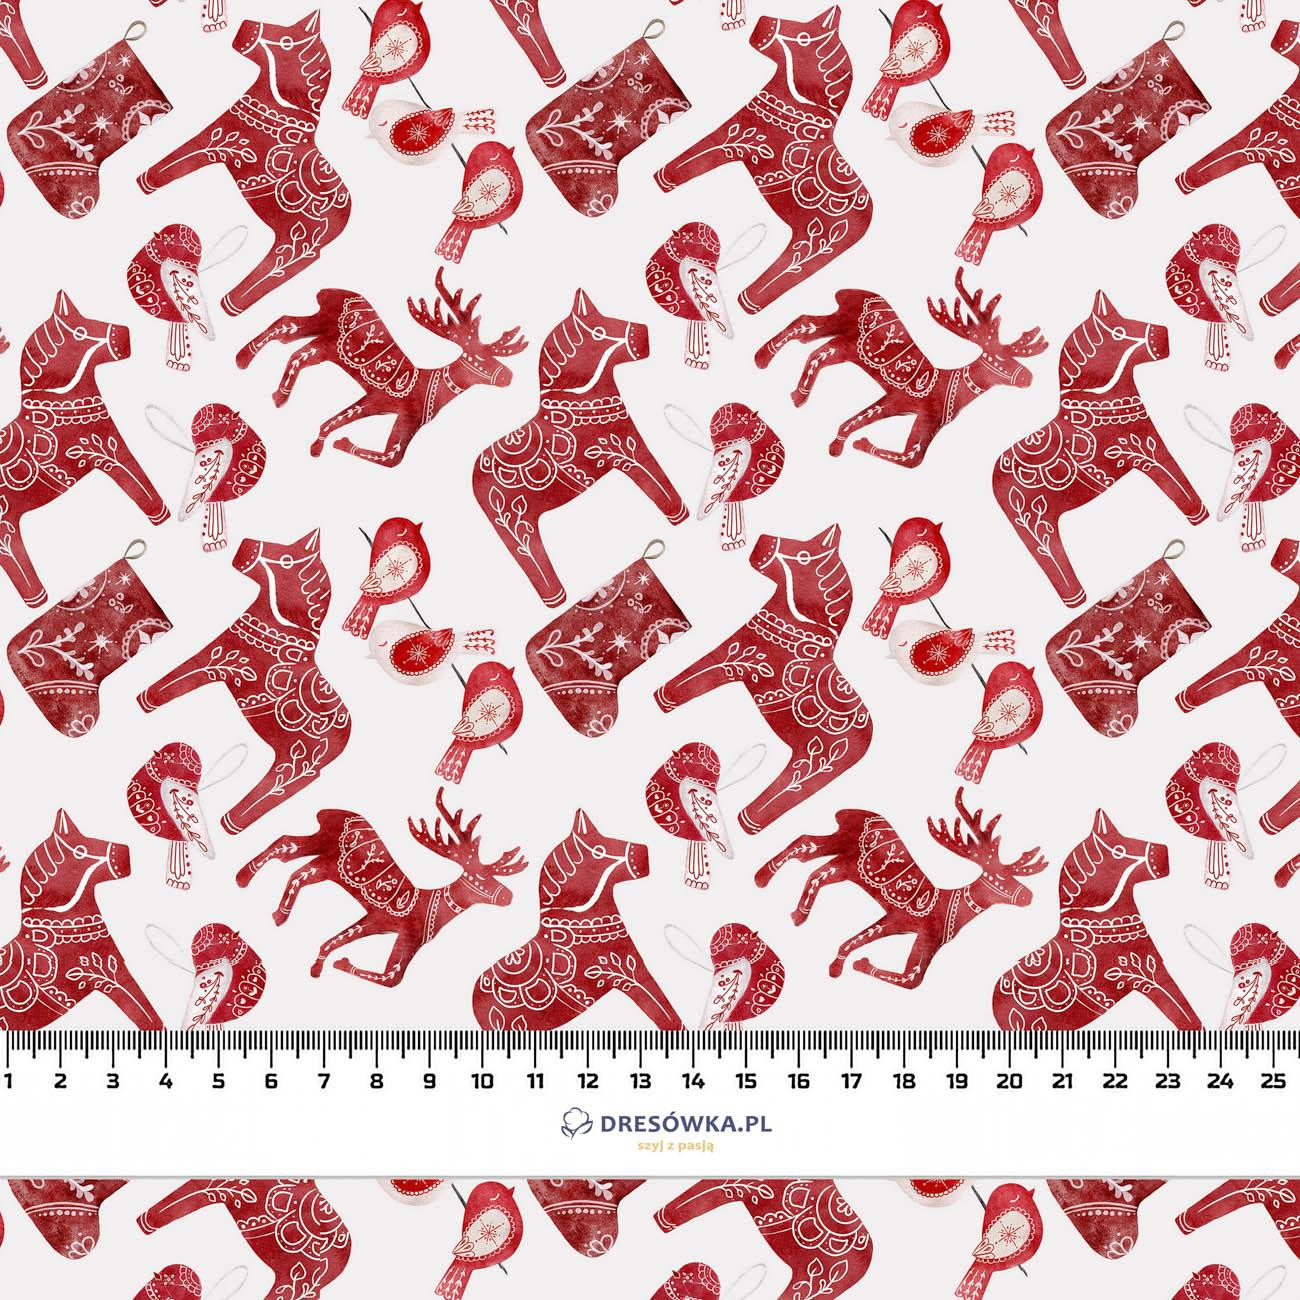 WINTER ANIMALS pat. 3 (NORDIC CHRISTMAS) - looped knit fabric